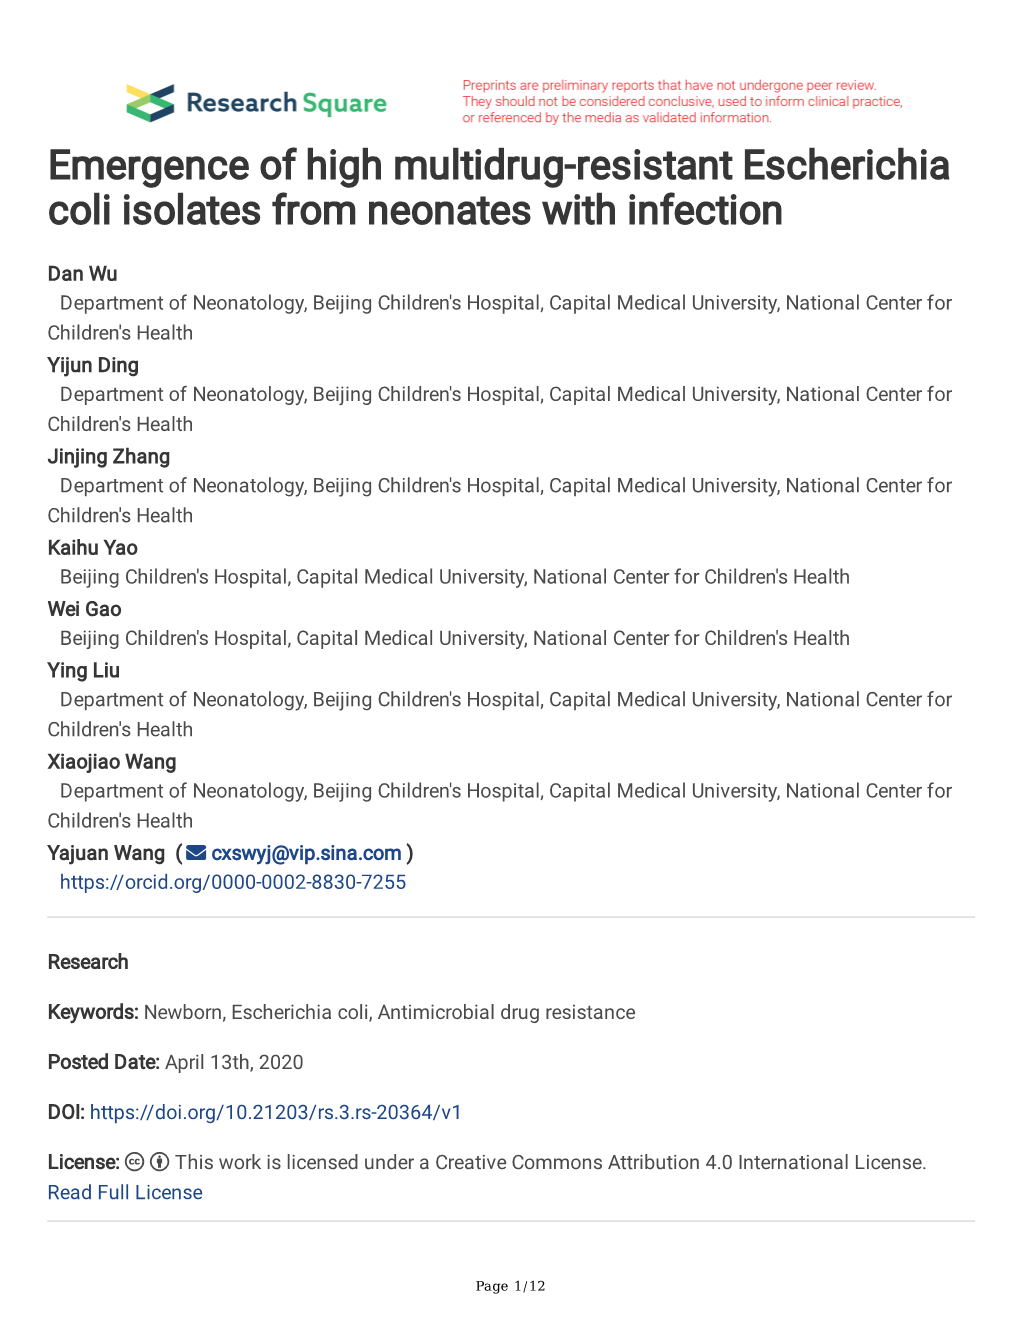 Emergence of High Multidrug-Resistant Escherichia Coli Isolates from Neonates with Infection